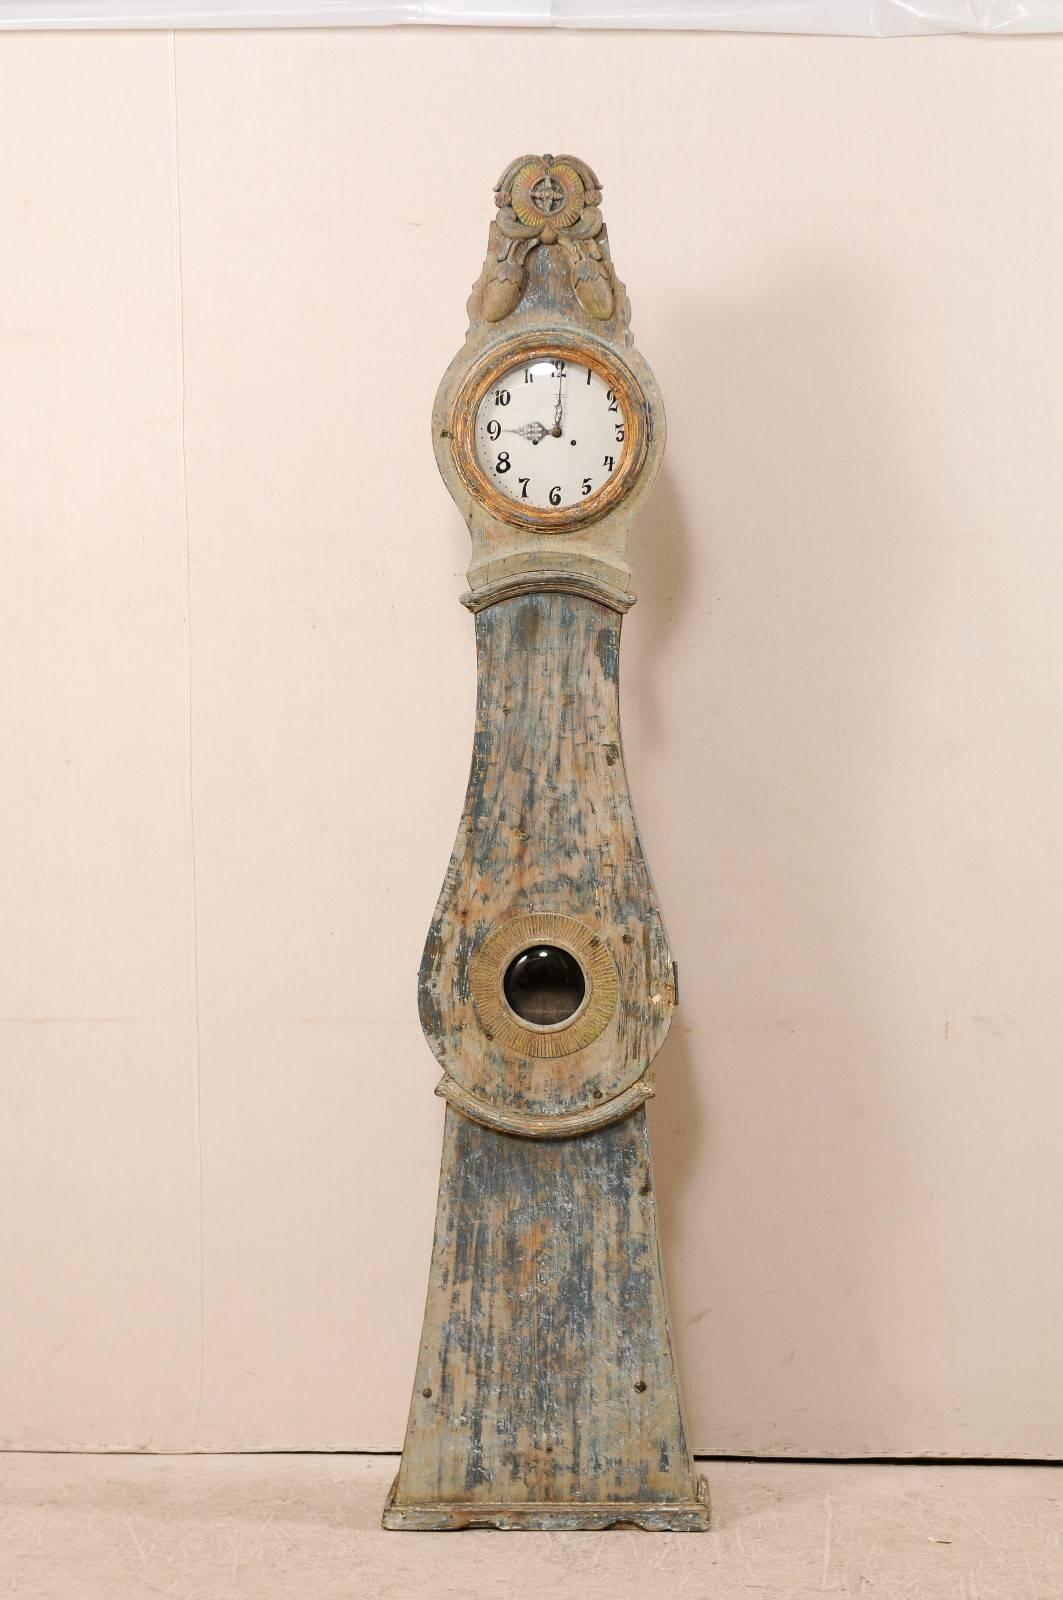 A 19th century Northern Swedish painted wood clock. This Swedish clock from Norrbotten County, Sweden (Northern region) features a nicely carved, exaggerated and raised crest adorned by a pair of hanging acorns. This clock retains it's original